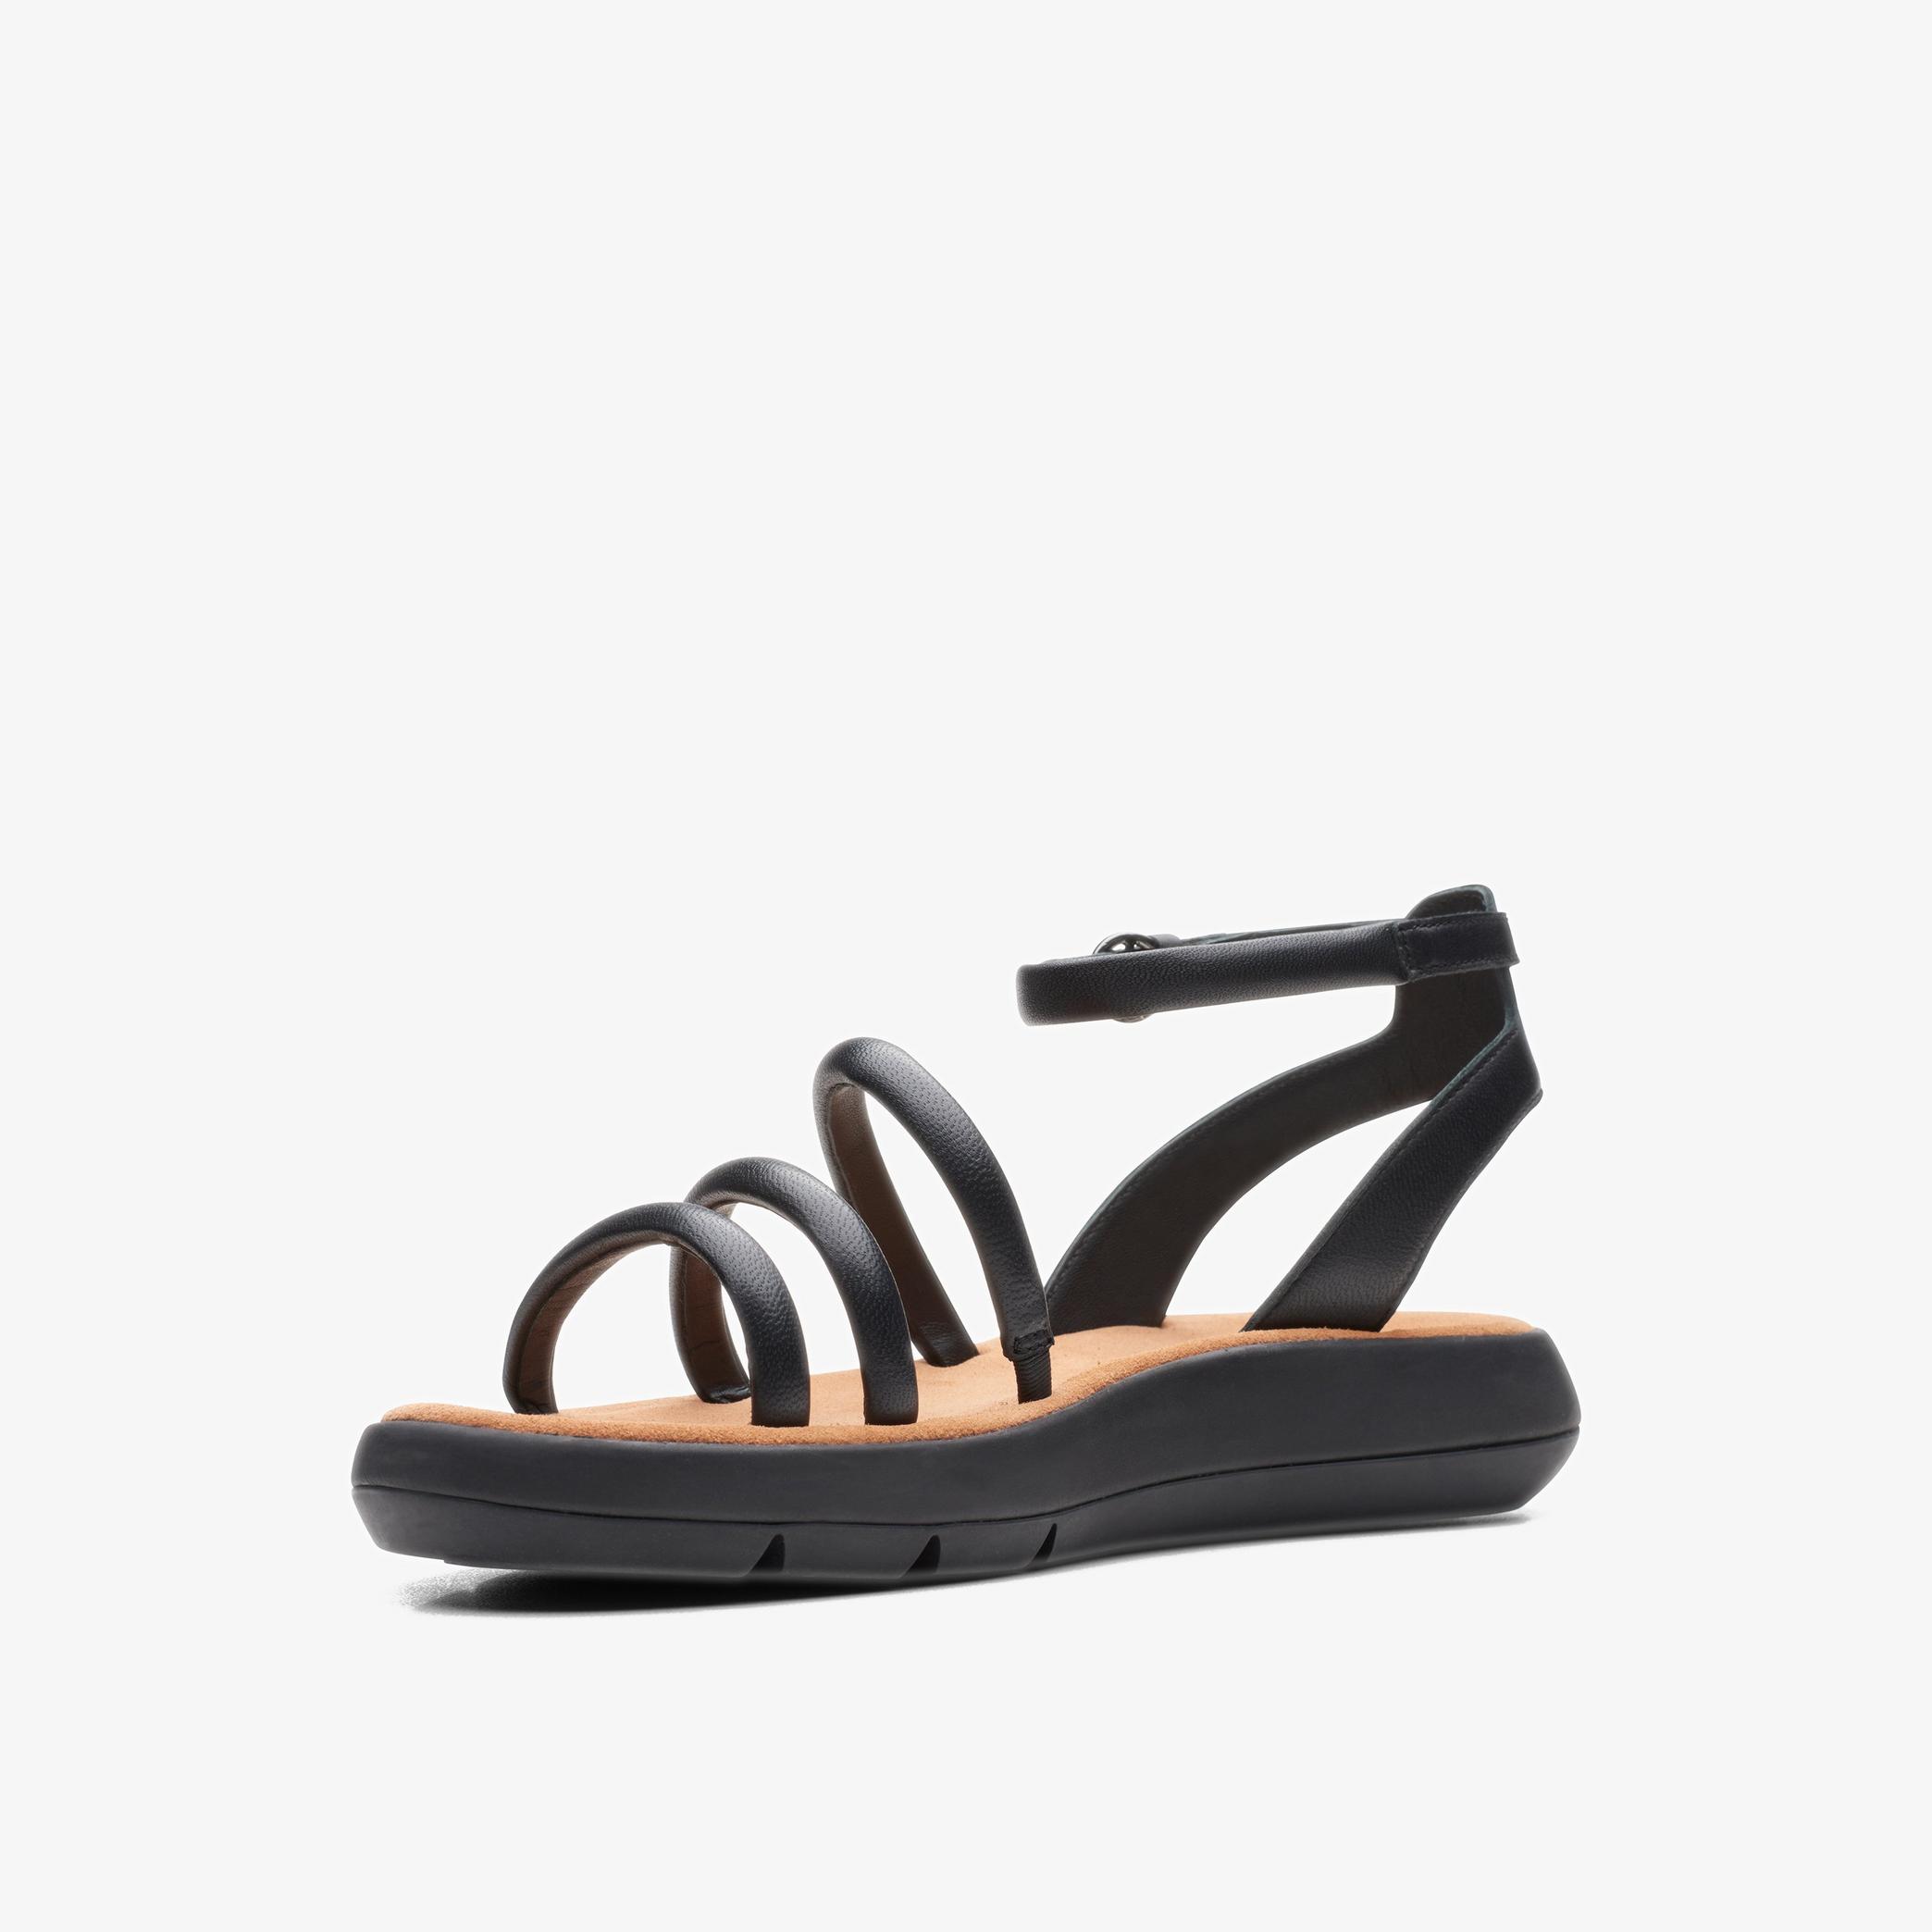 Jemsa Style Black Leather Flat Sandals, view 4 of 6